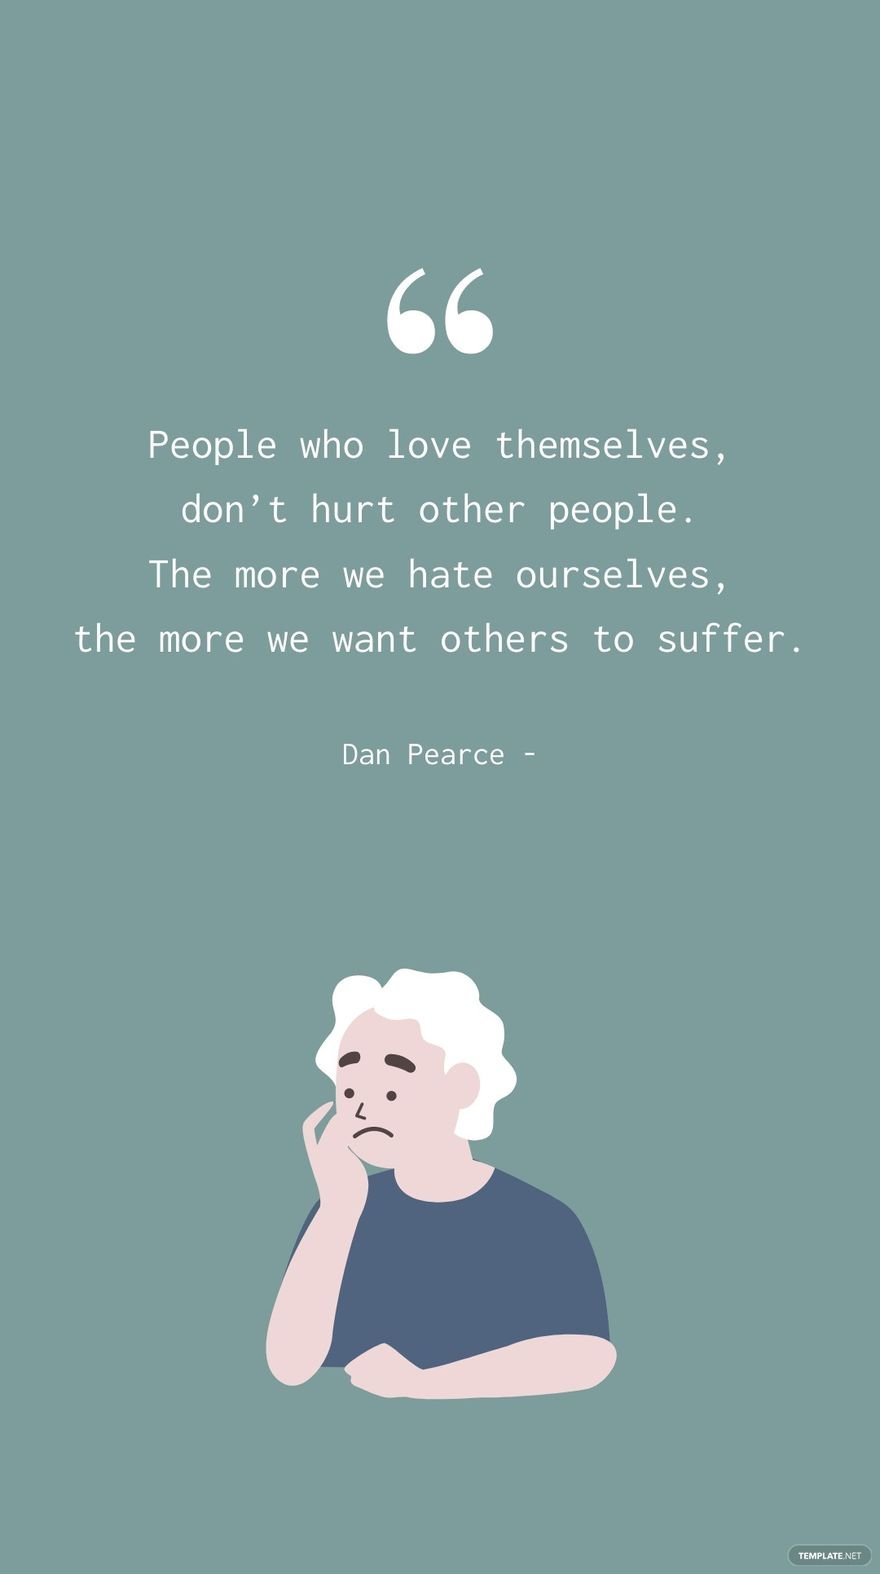 Free Dan Pearce - People who love themselves, don’t hurt other people. The more we hate ourselves, the more we want others to suffer. in JPG